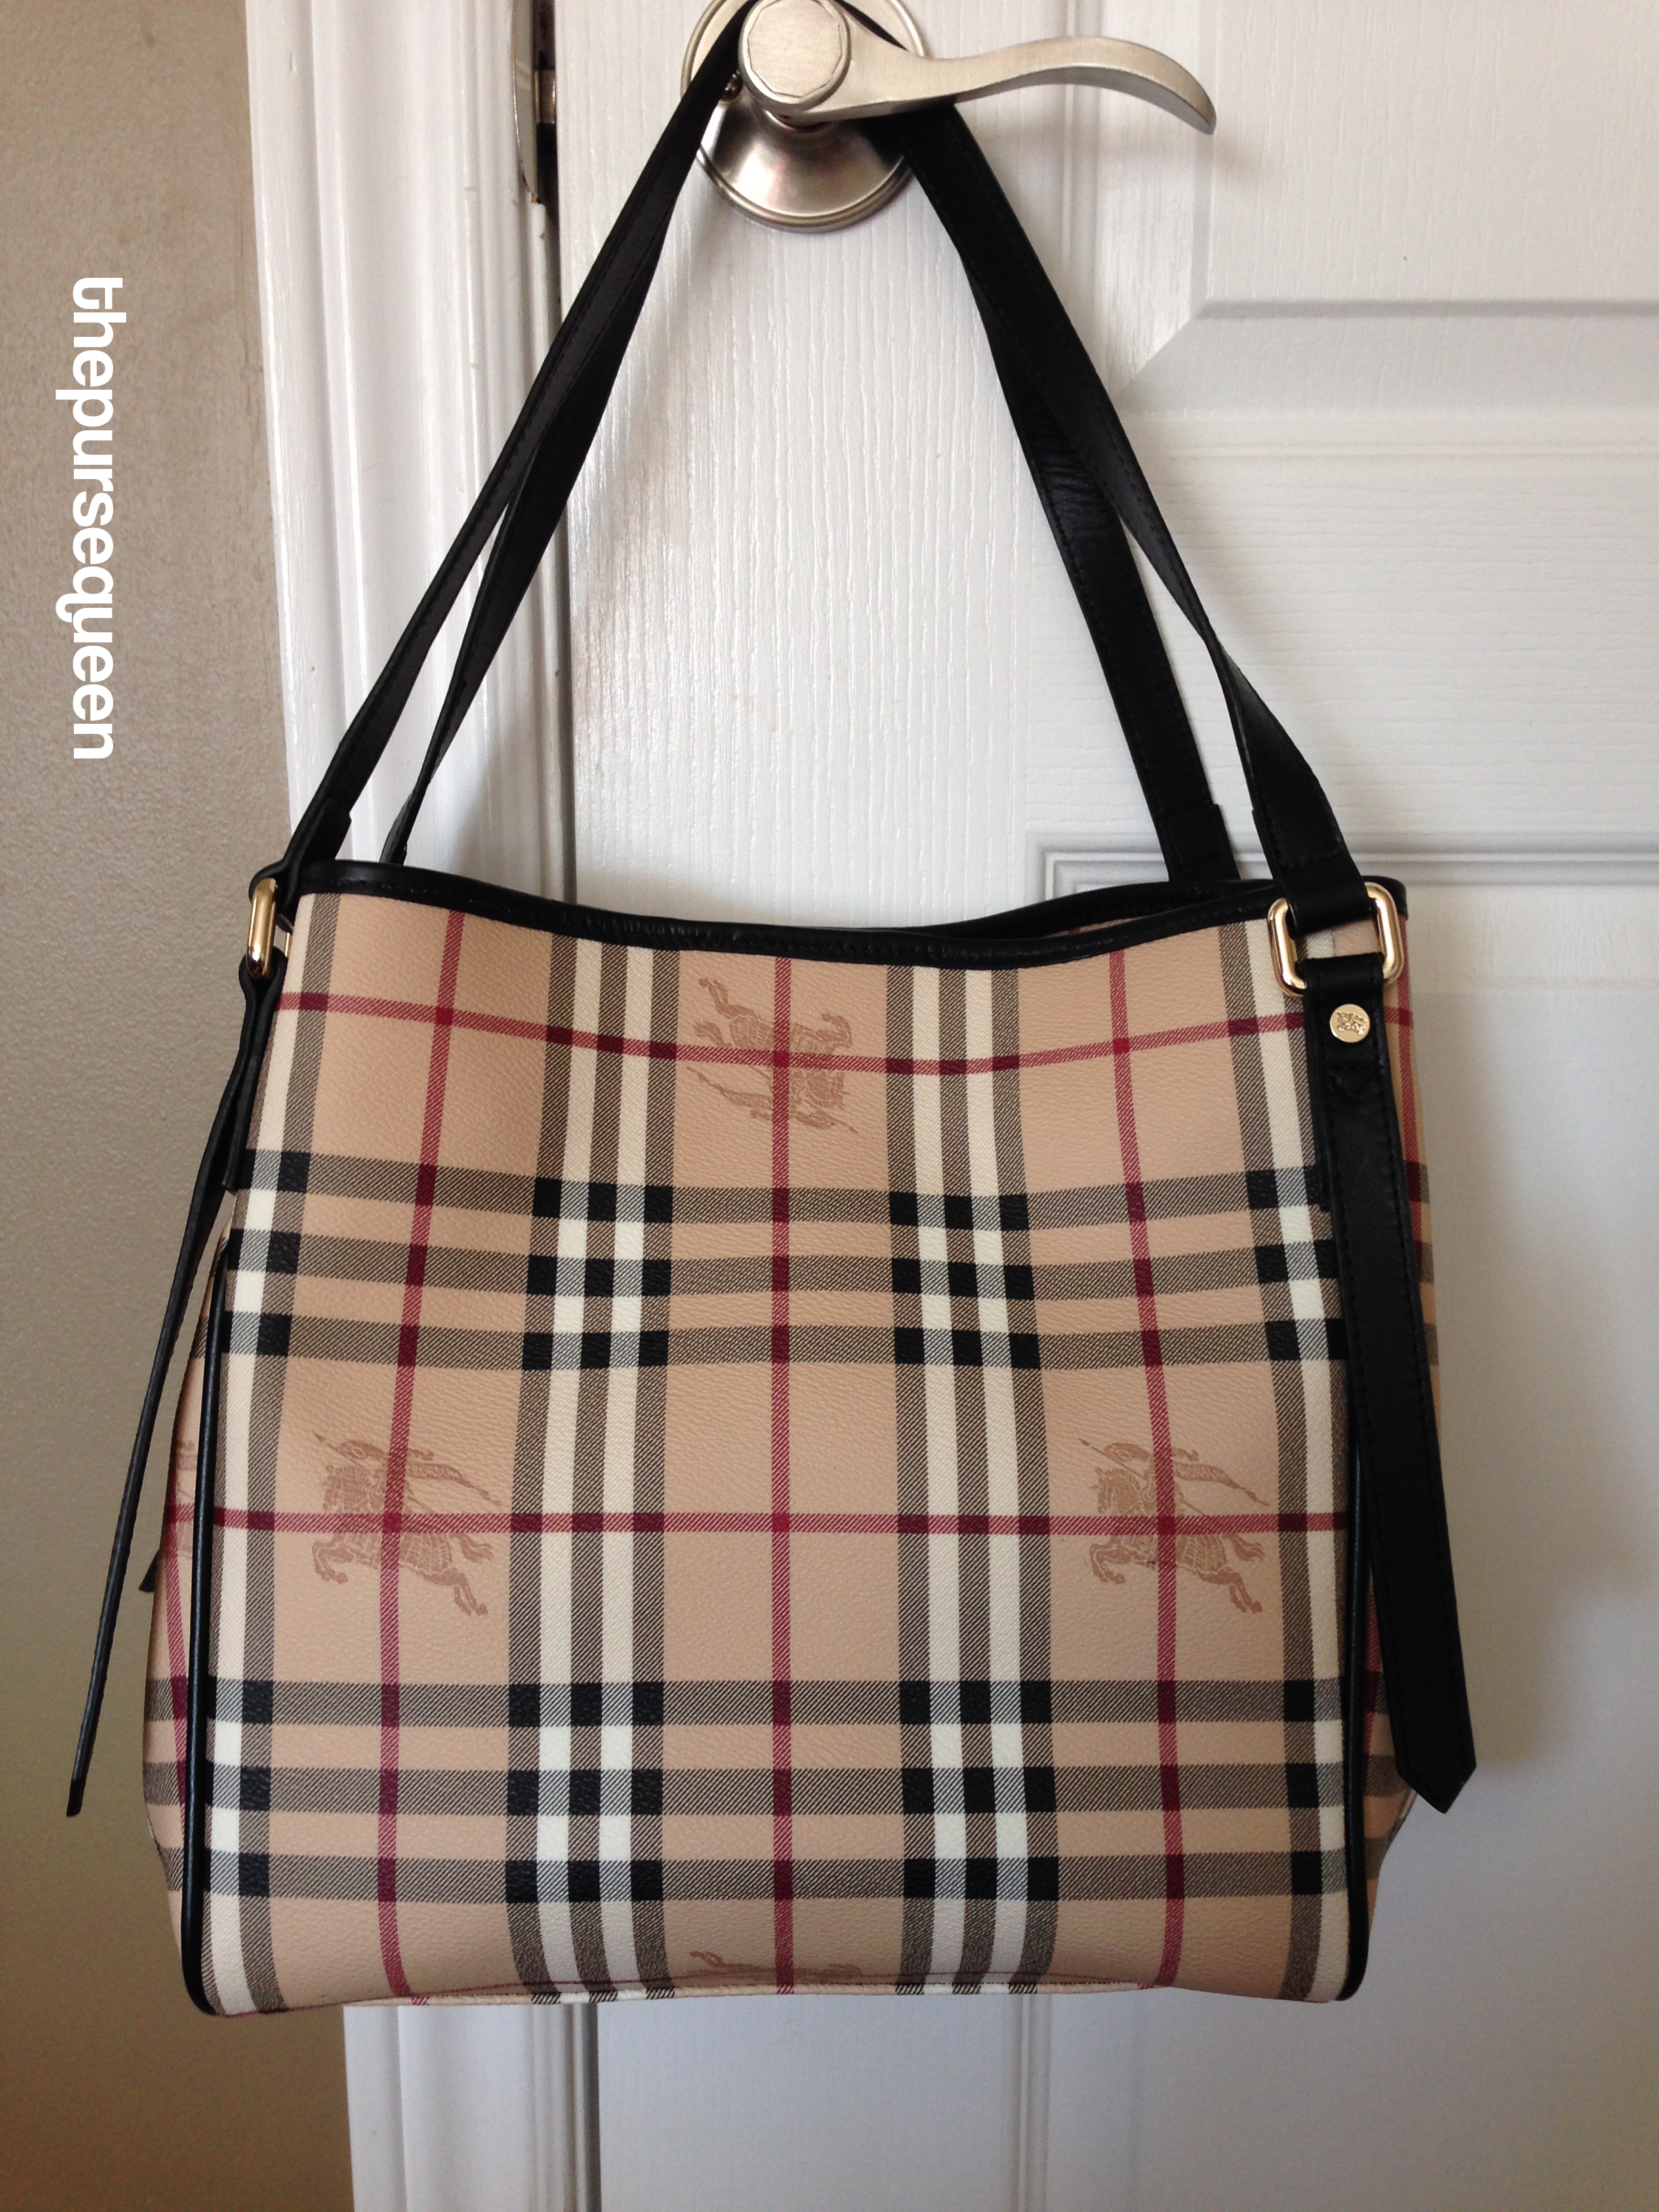 real burberry purse